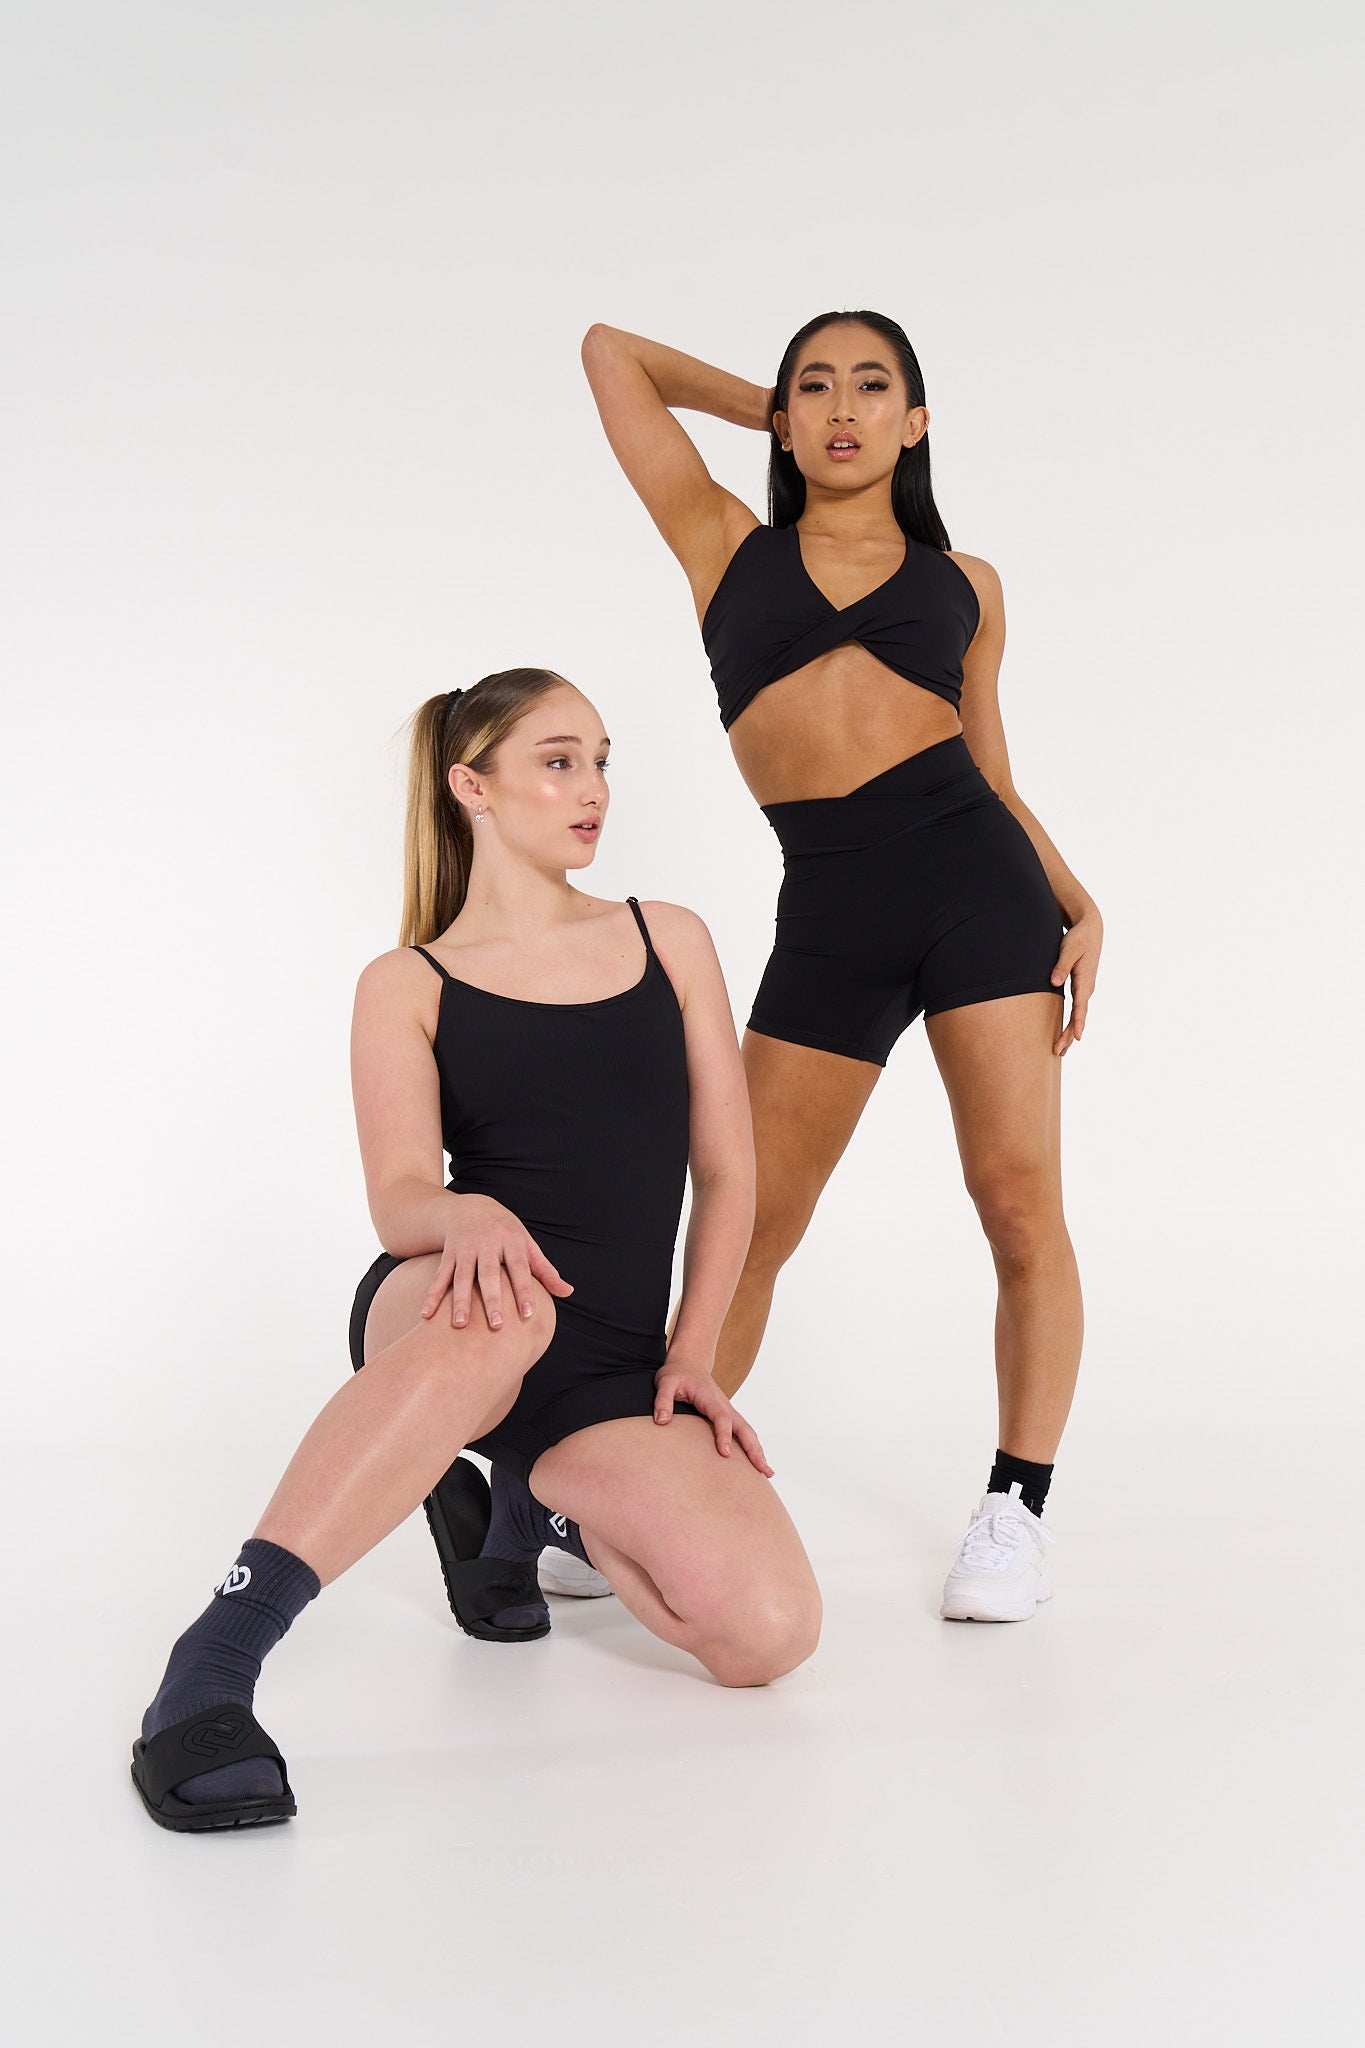 Claudia Dean World - My dance-wear brand @collectionsbyclaudia has